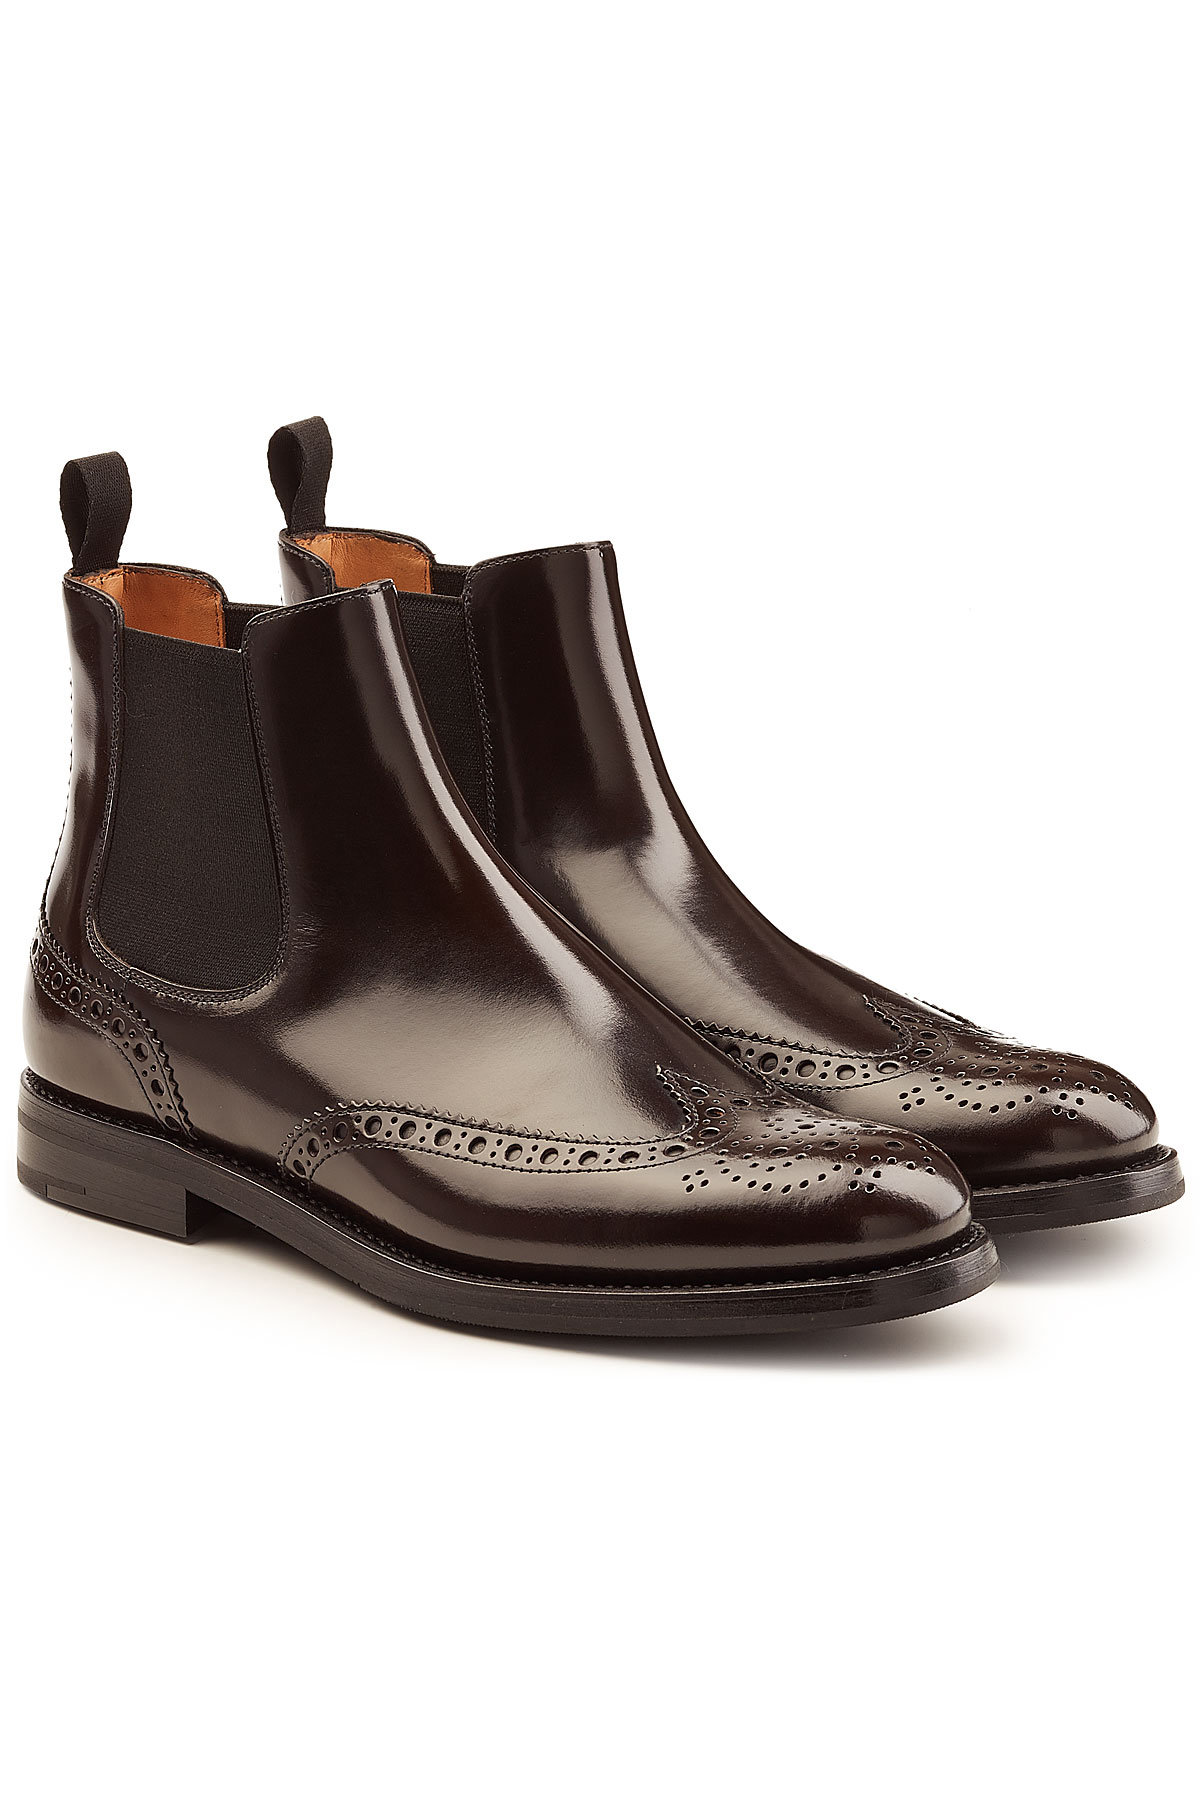 Church's - Patent Leather Brogue Ankle Boots